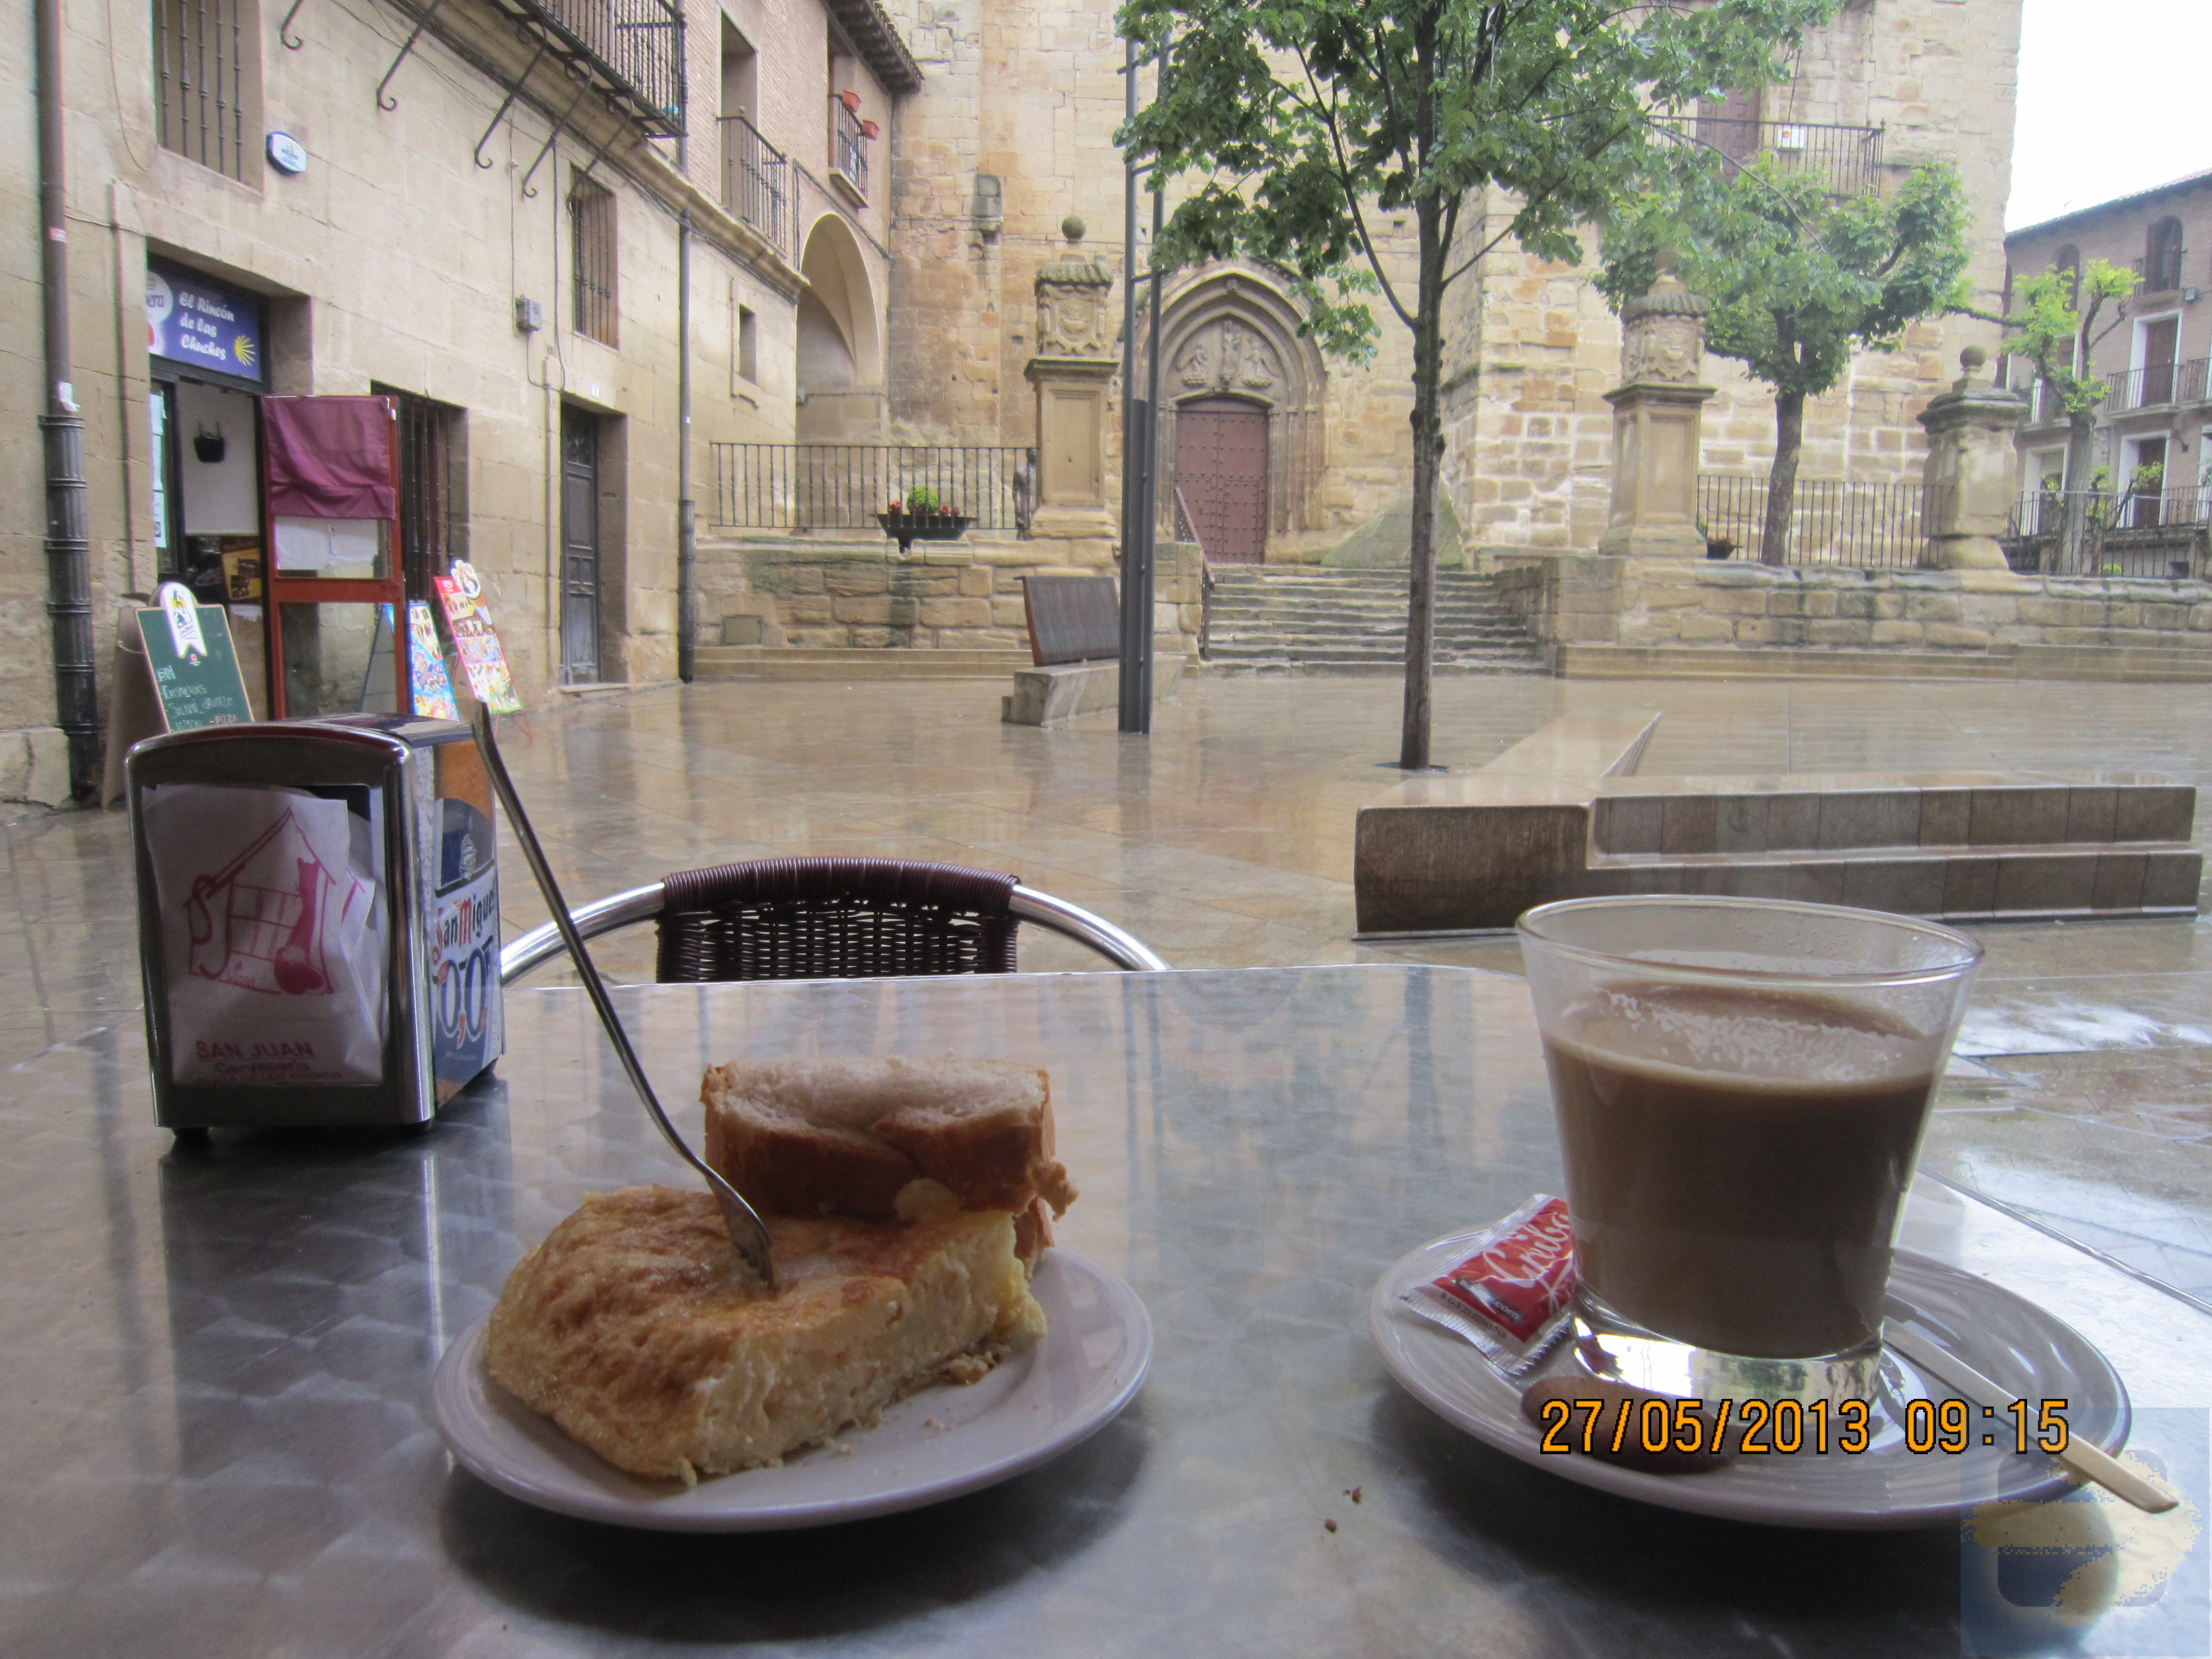 Even a wet morning in Viana has its pleasures.